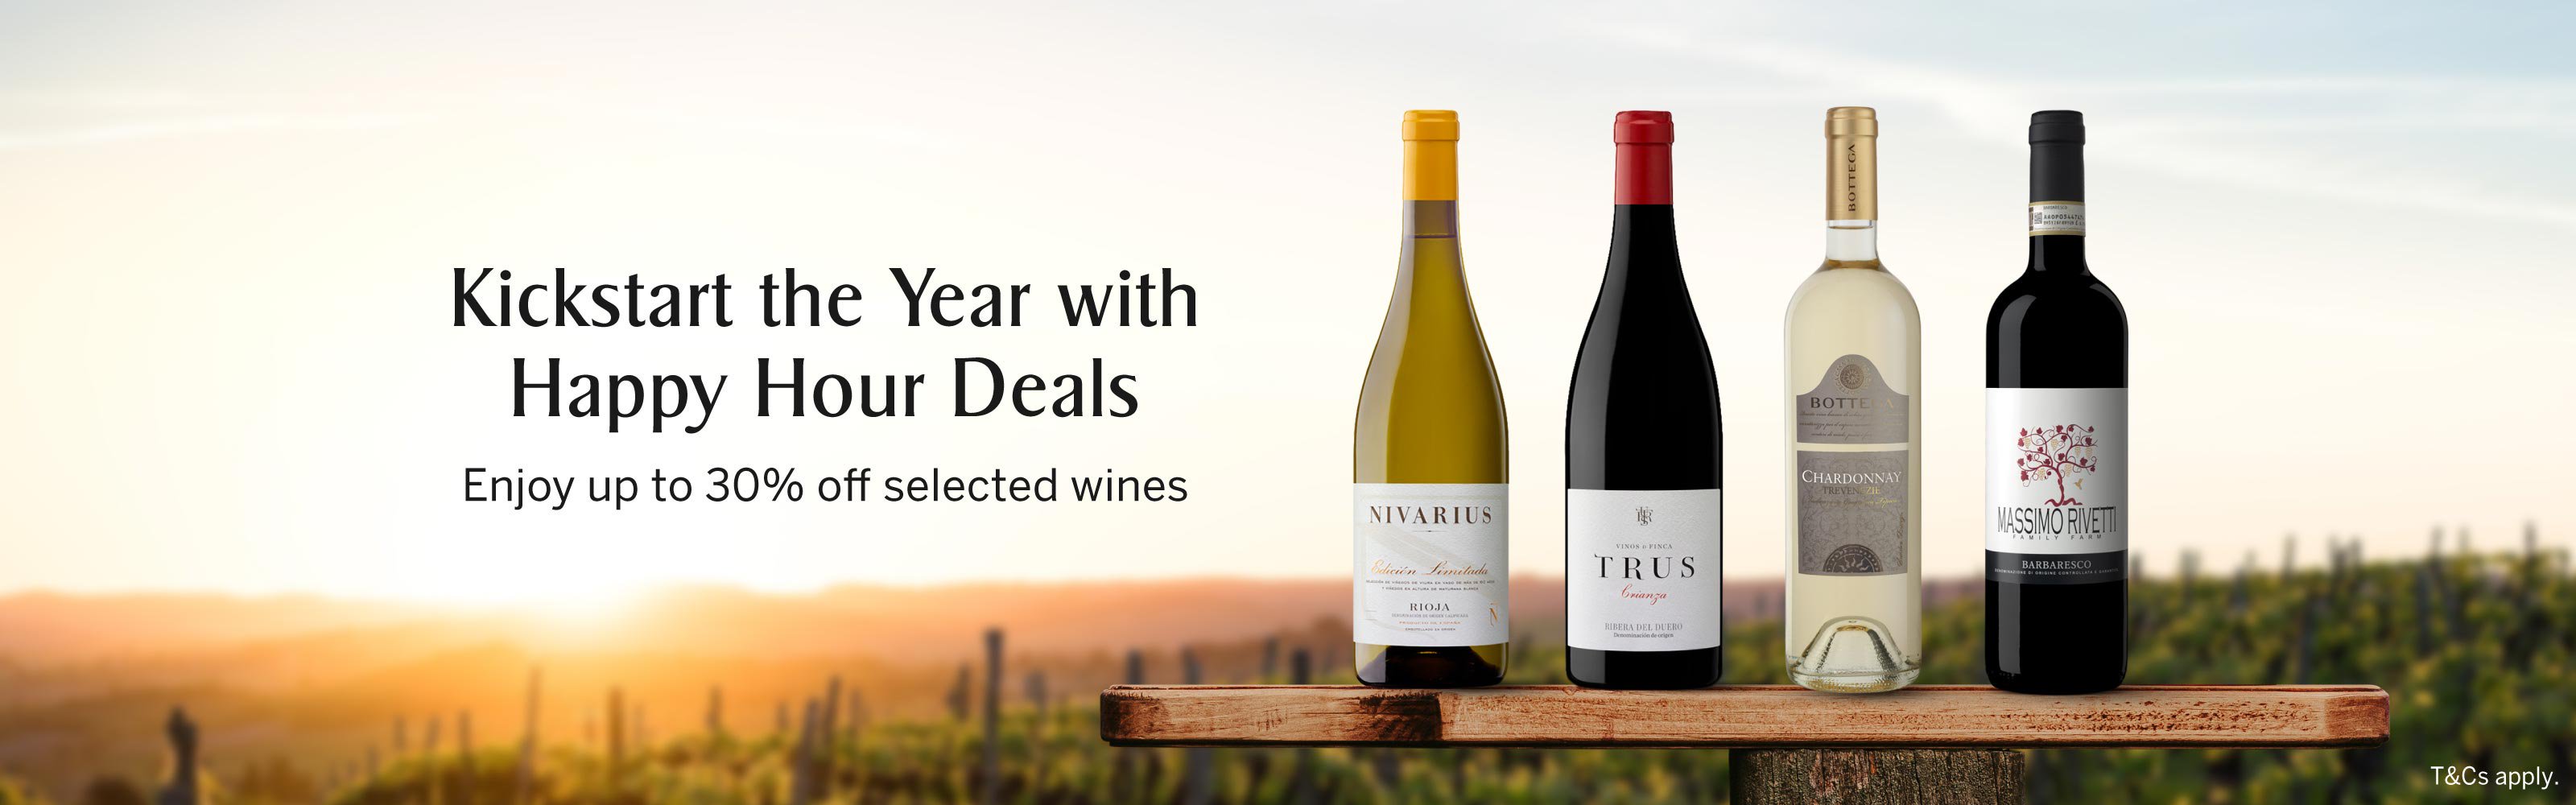 Jan 2022 - Liquor Deals - Up to 30% off selected wines